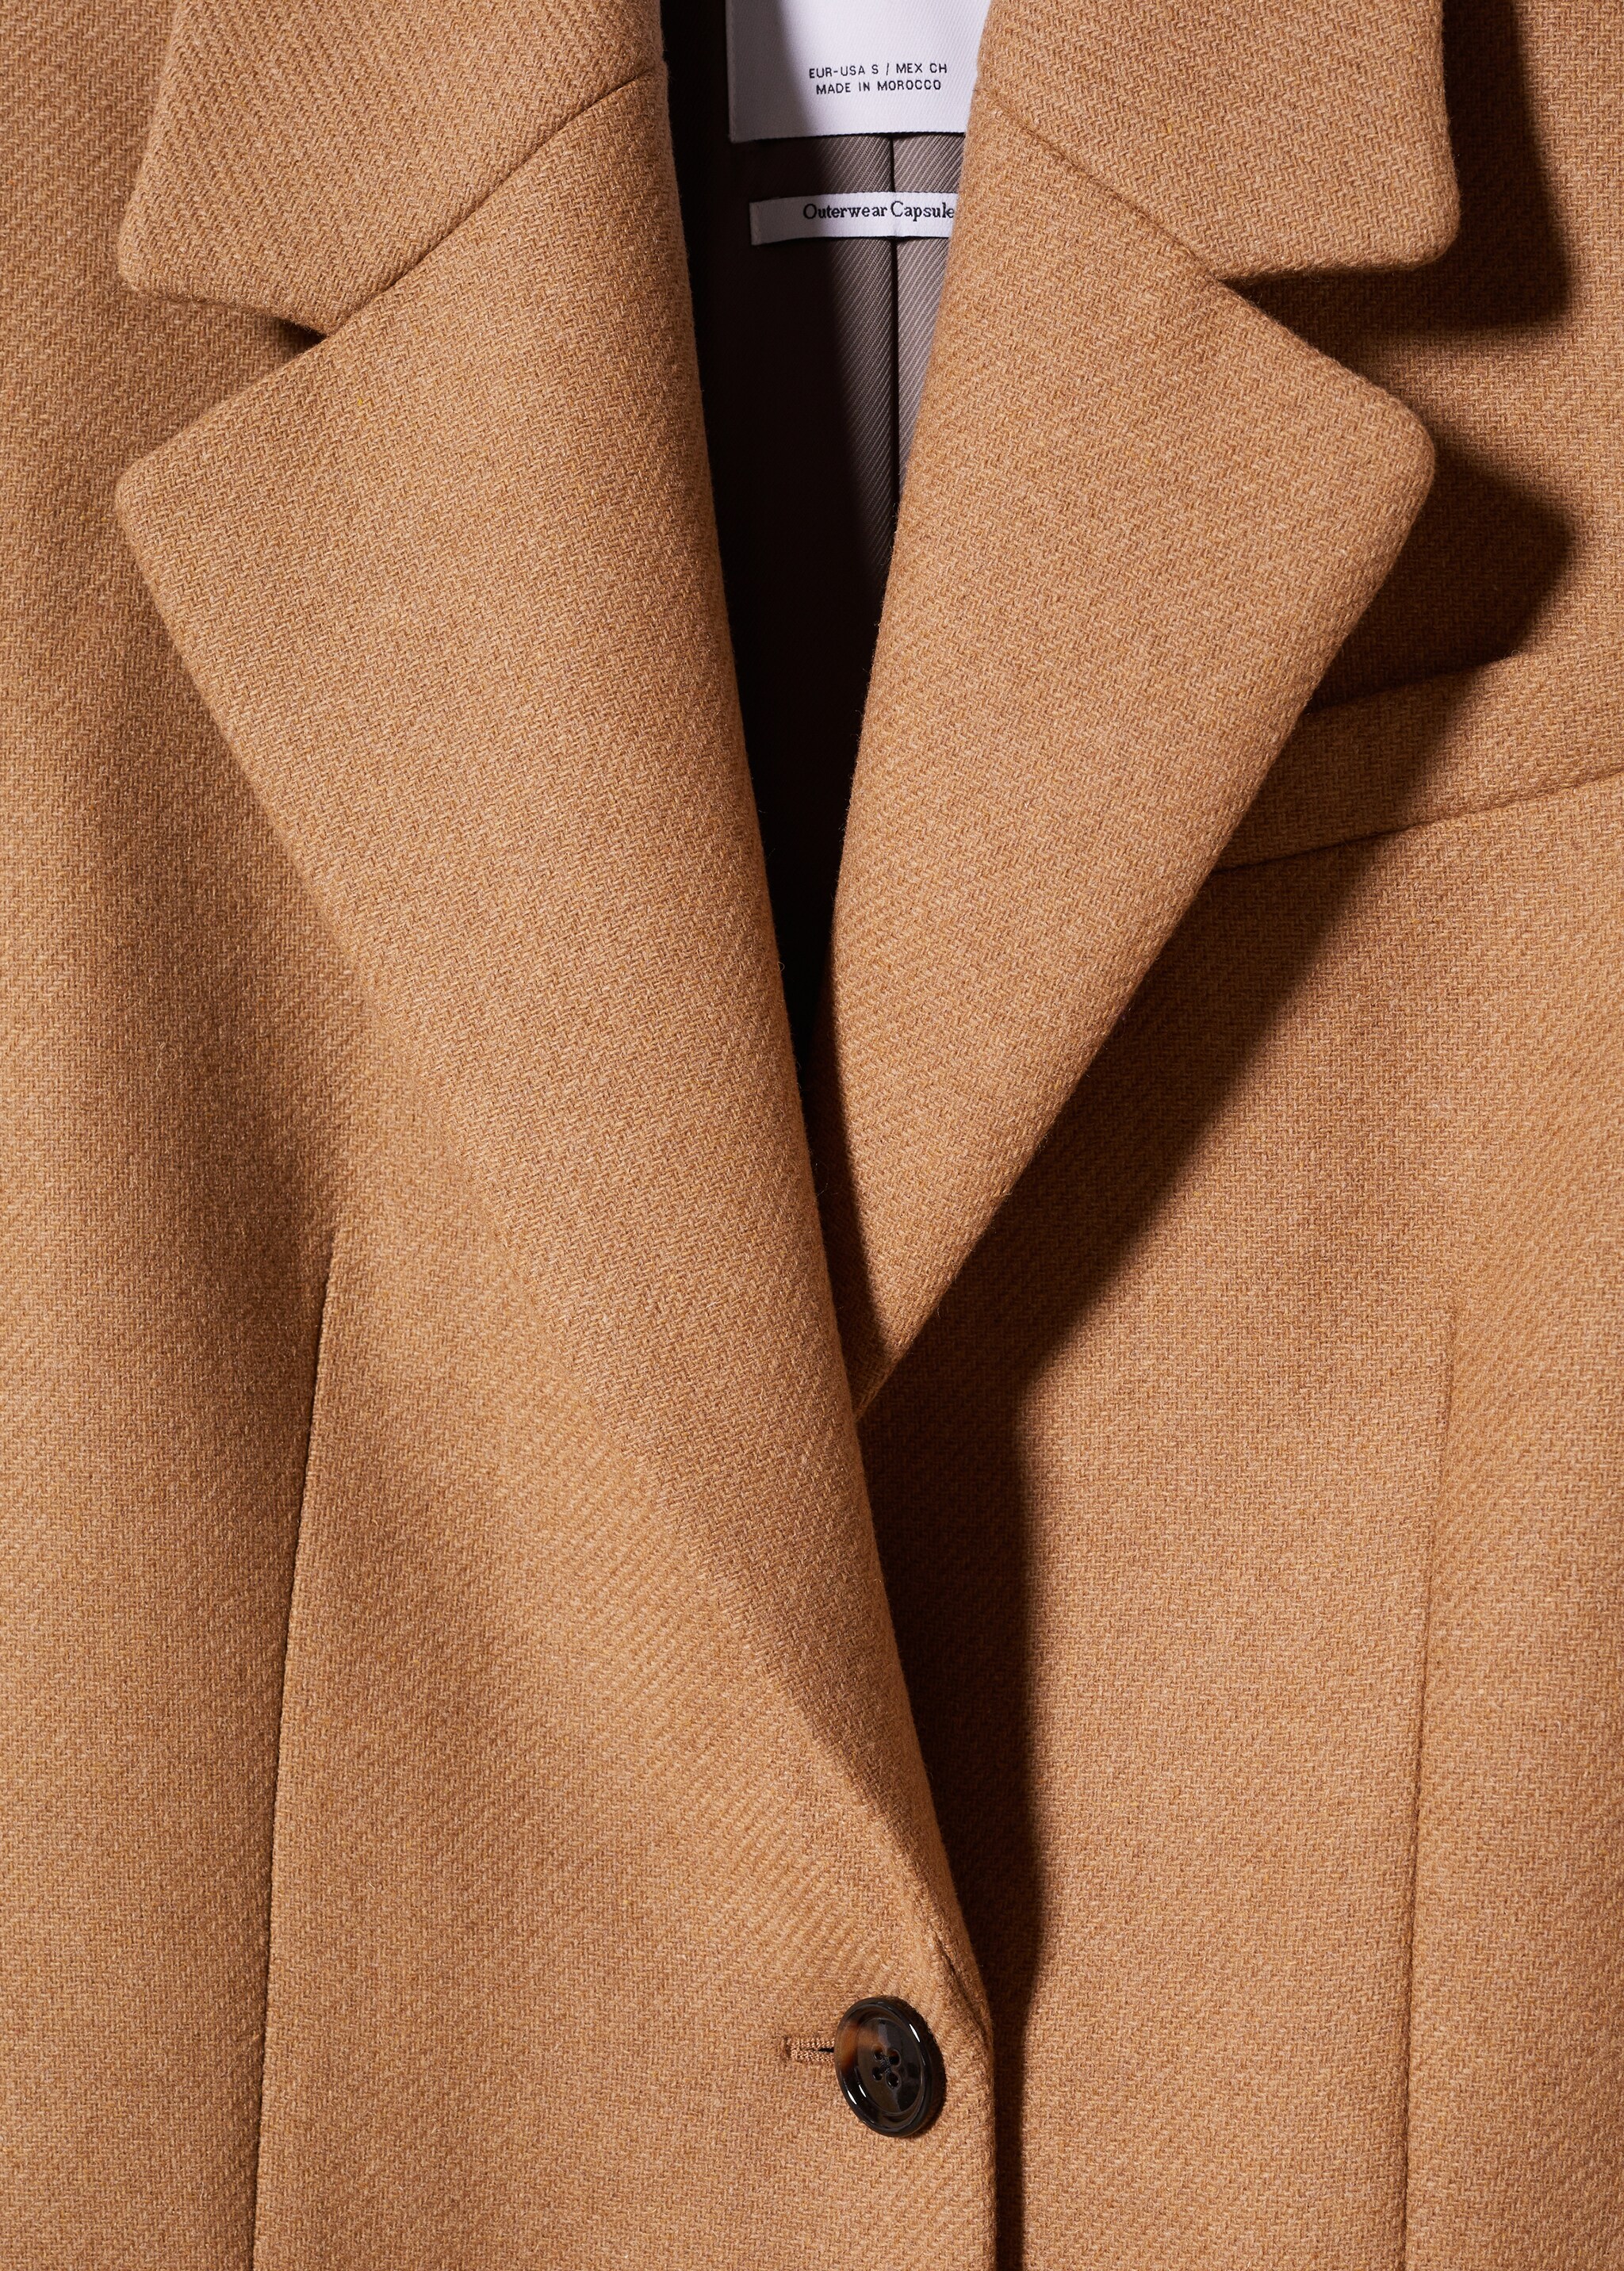 Wool overcoat - Details of the article 8